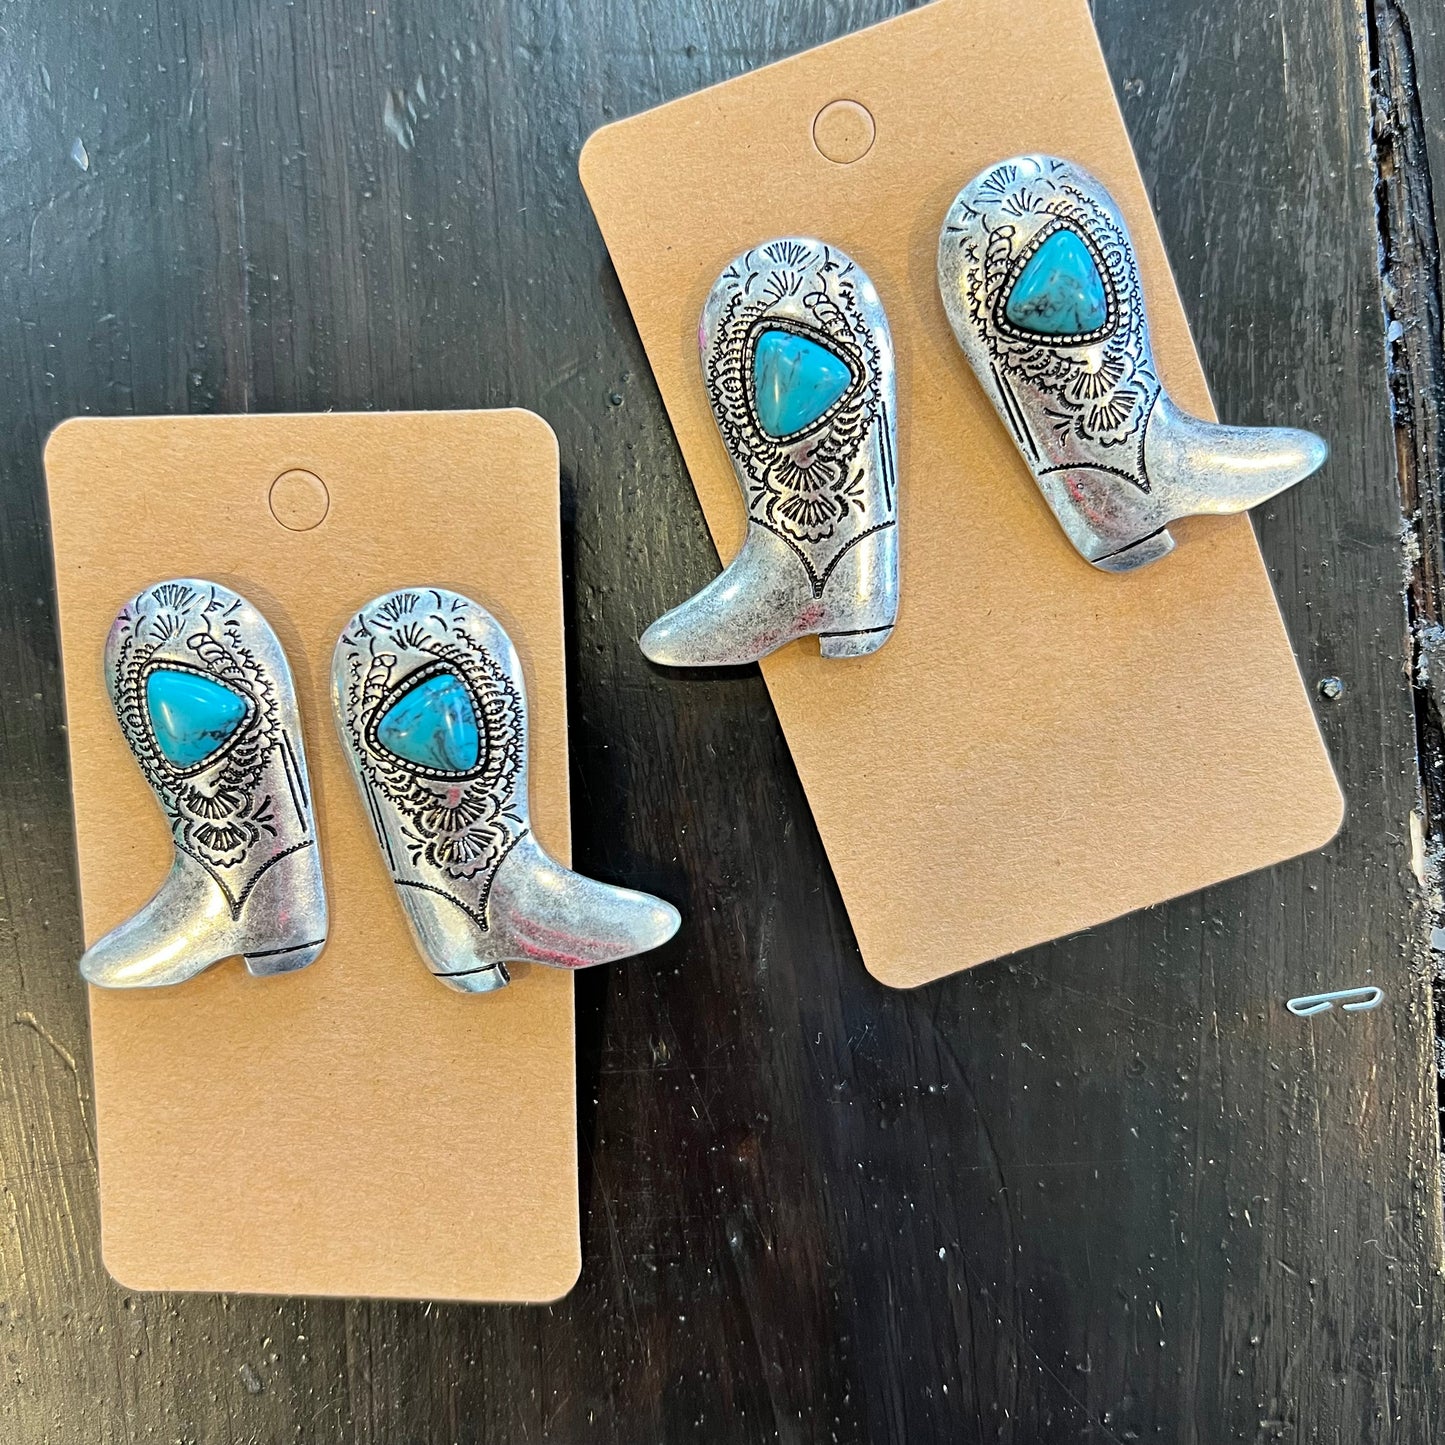 Turquoise Cowboy Boot earrings